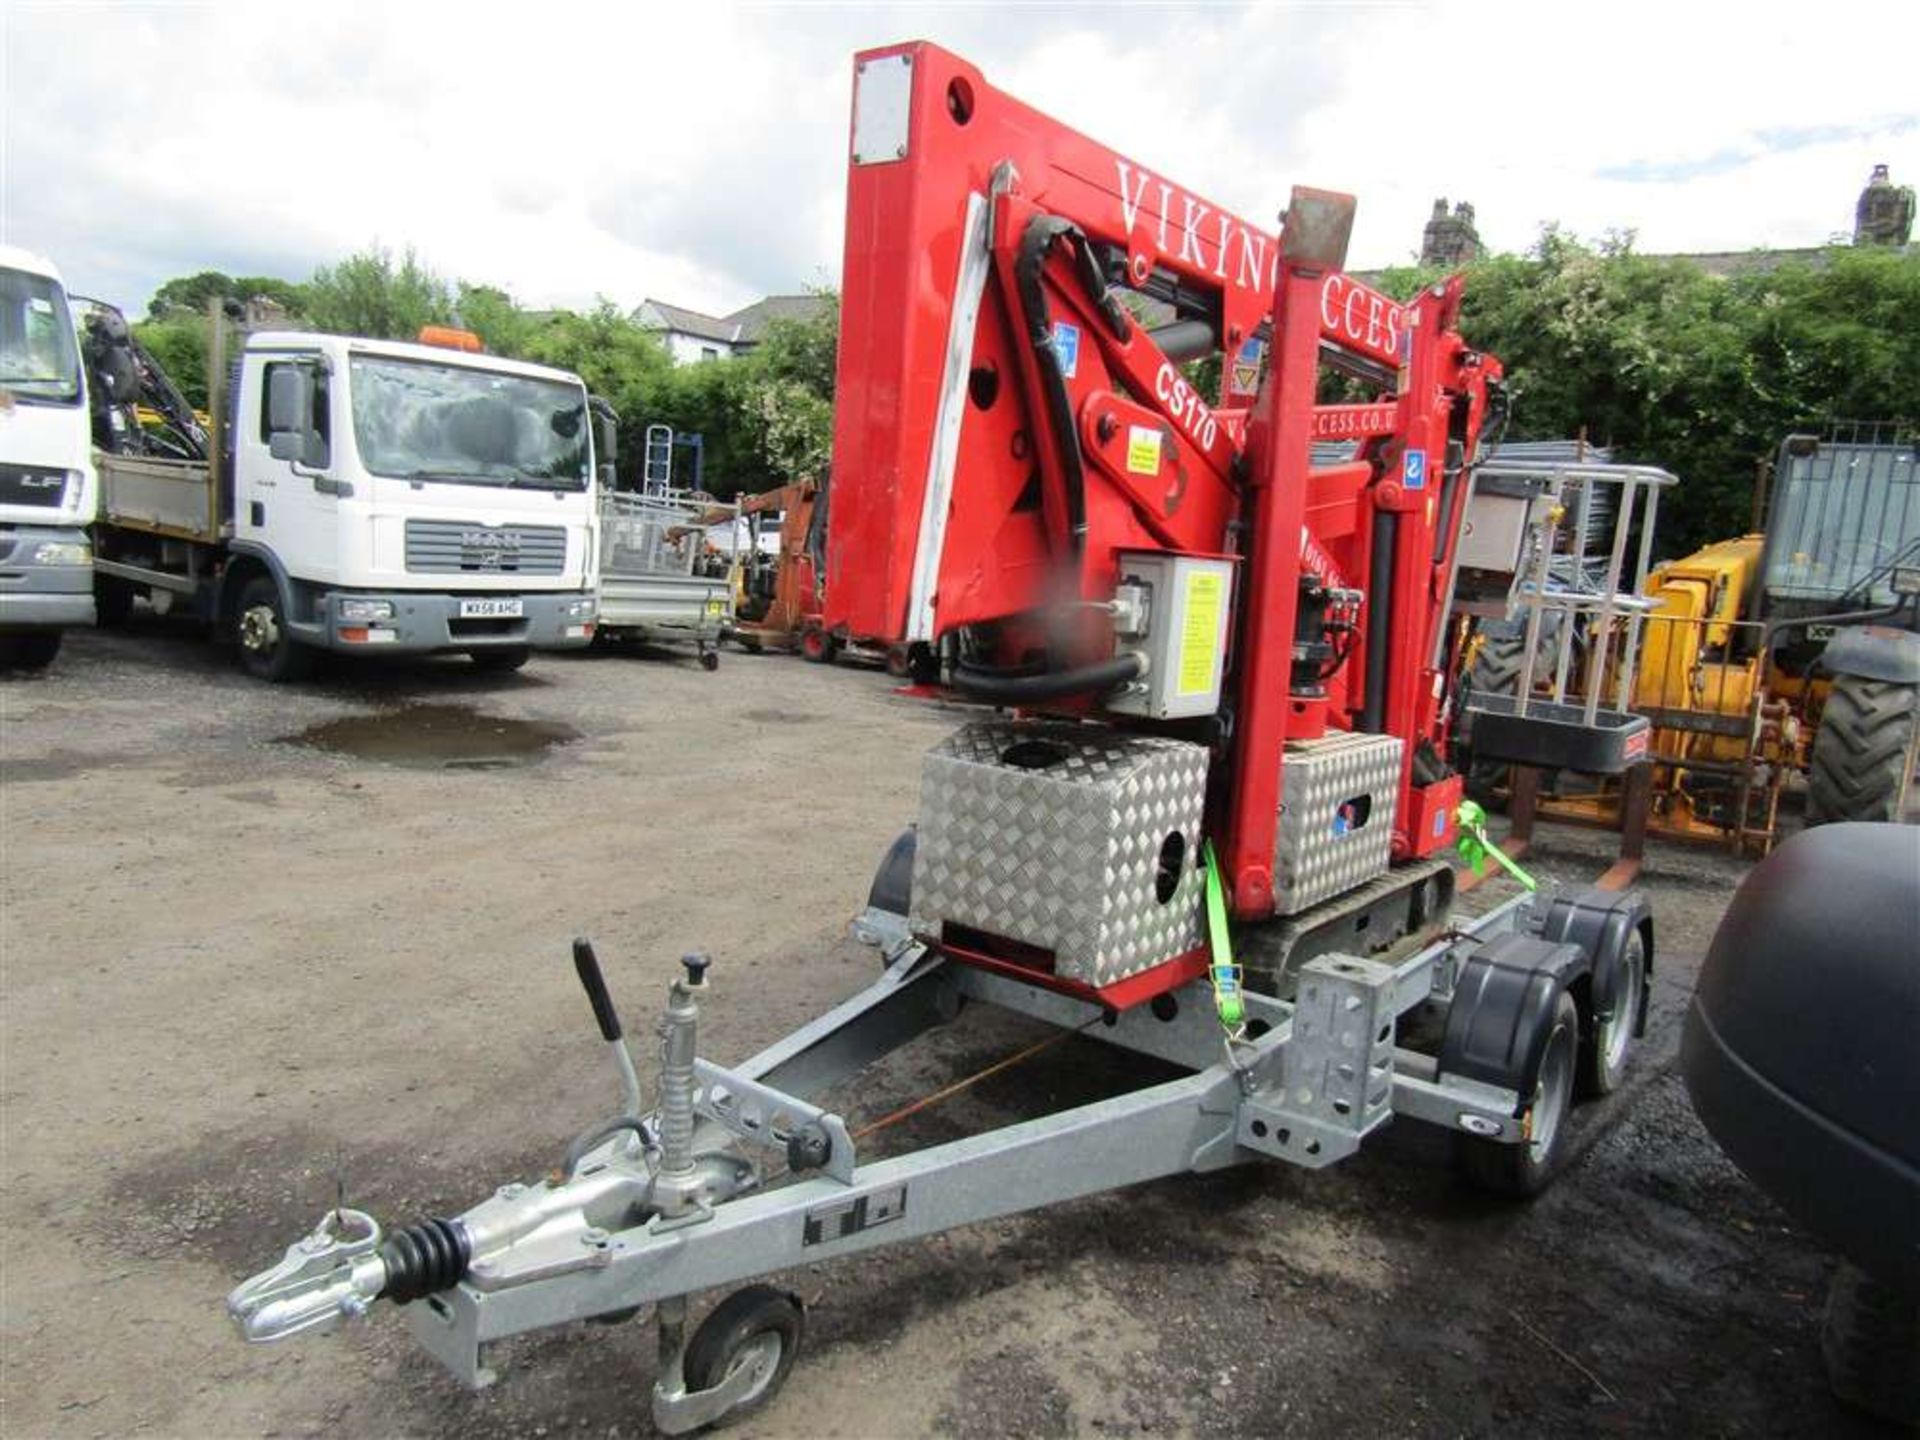 Viking Access CS170 Scissor Lift & Trailer (Direct Electricity NW) - Image 2 of 5